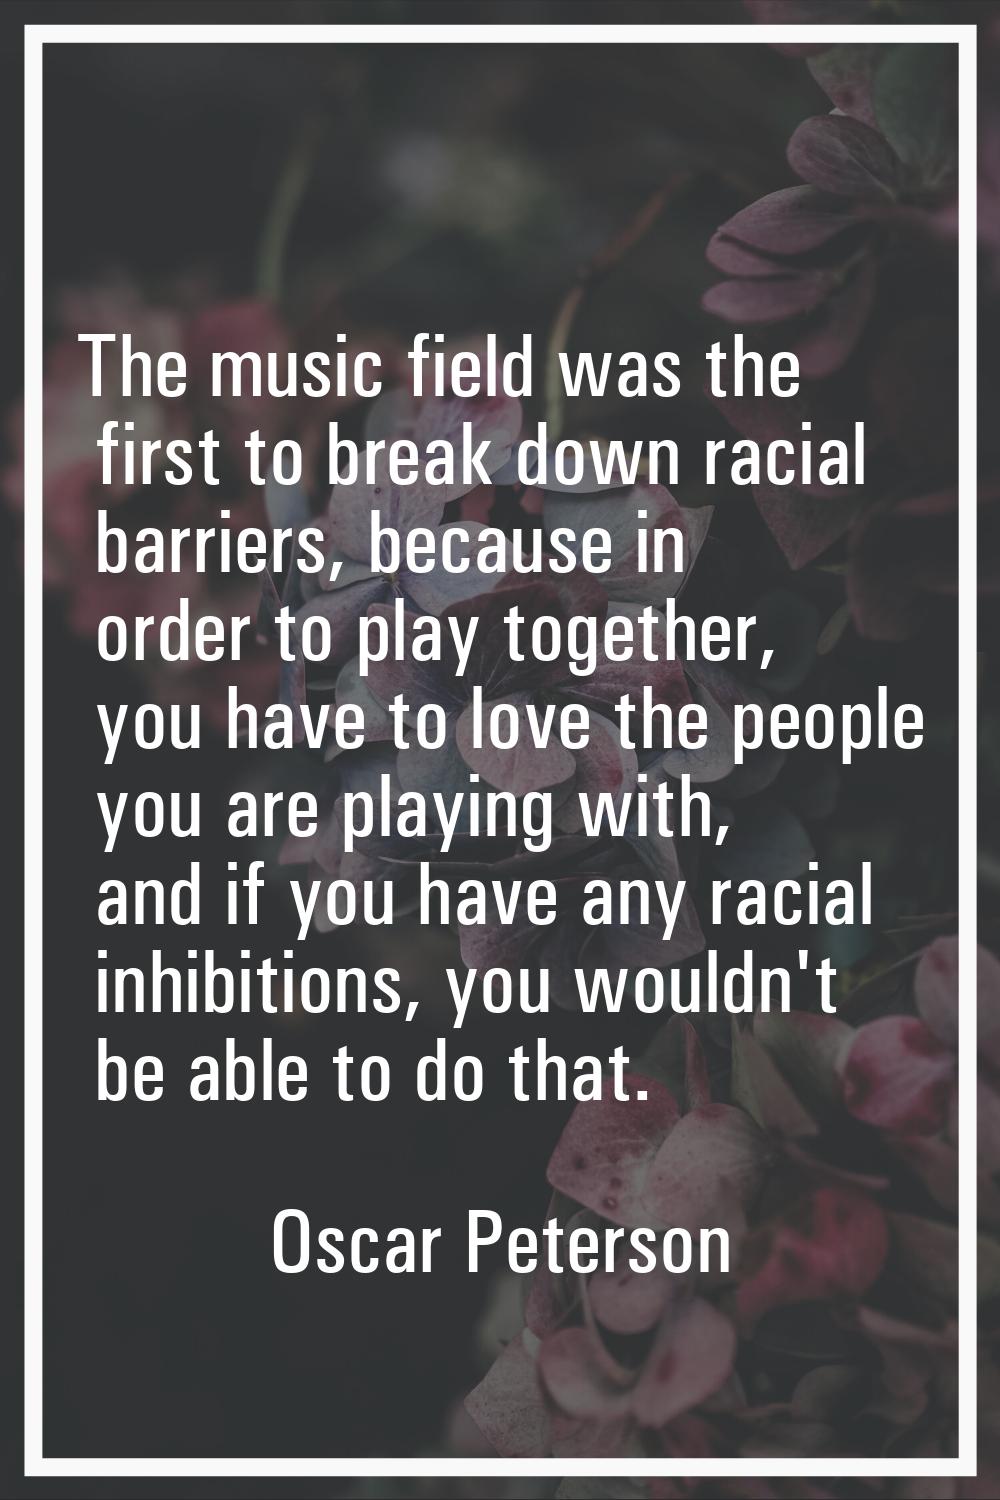 The music field was the first to break down racial barriers, because in order to play together, you